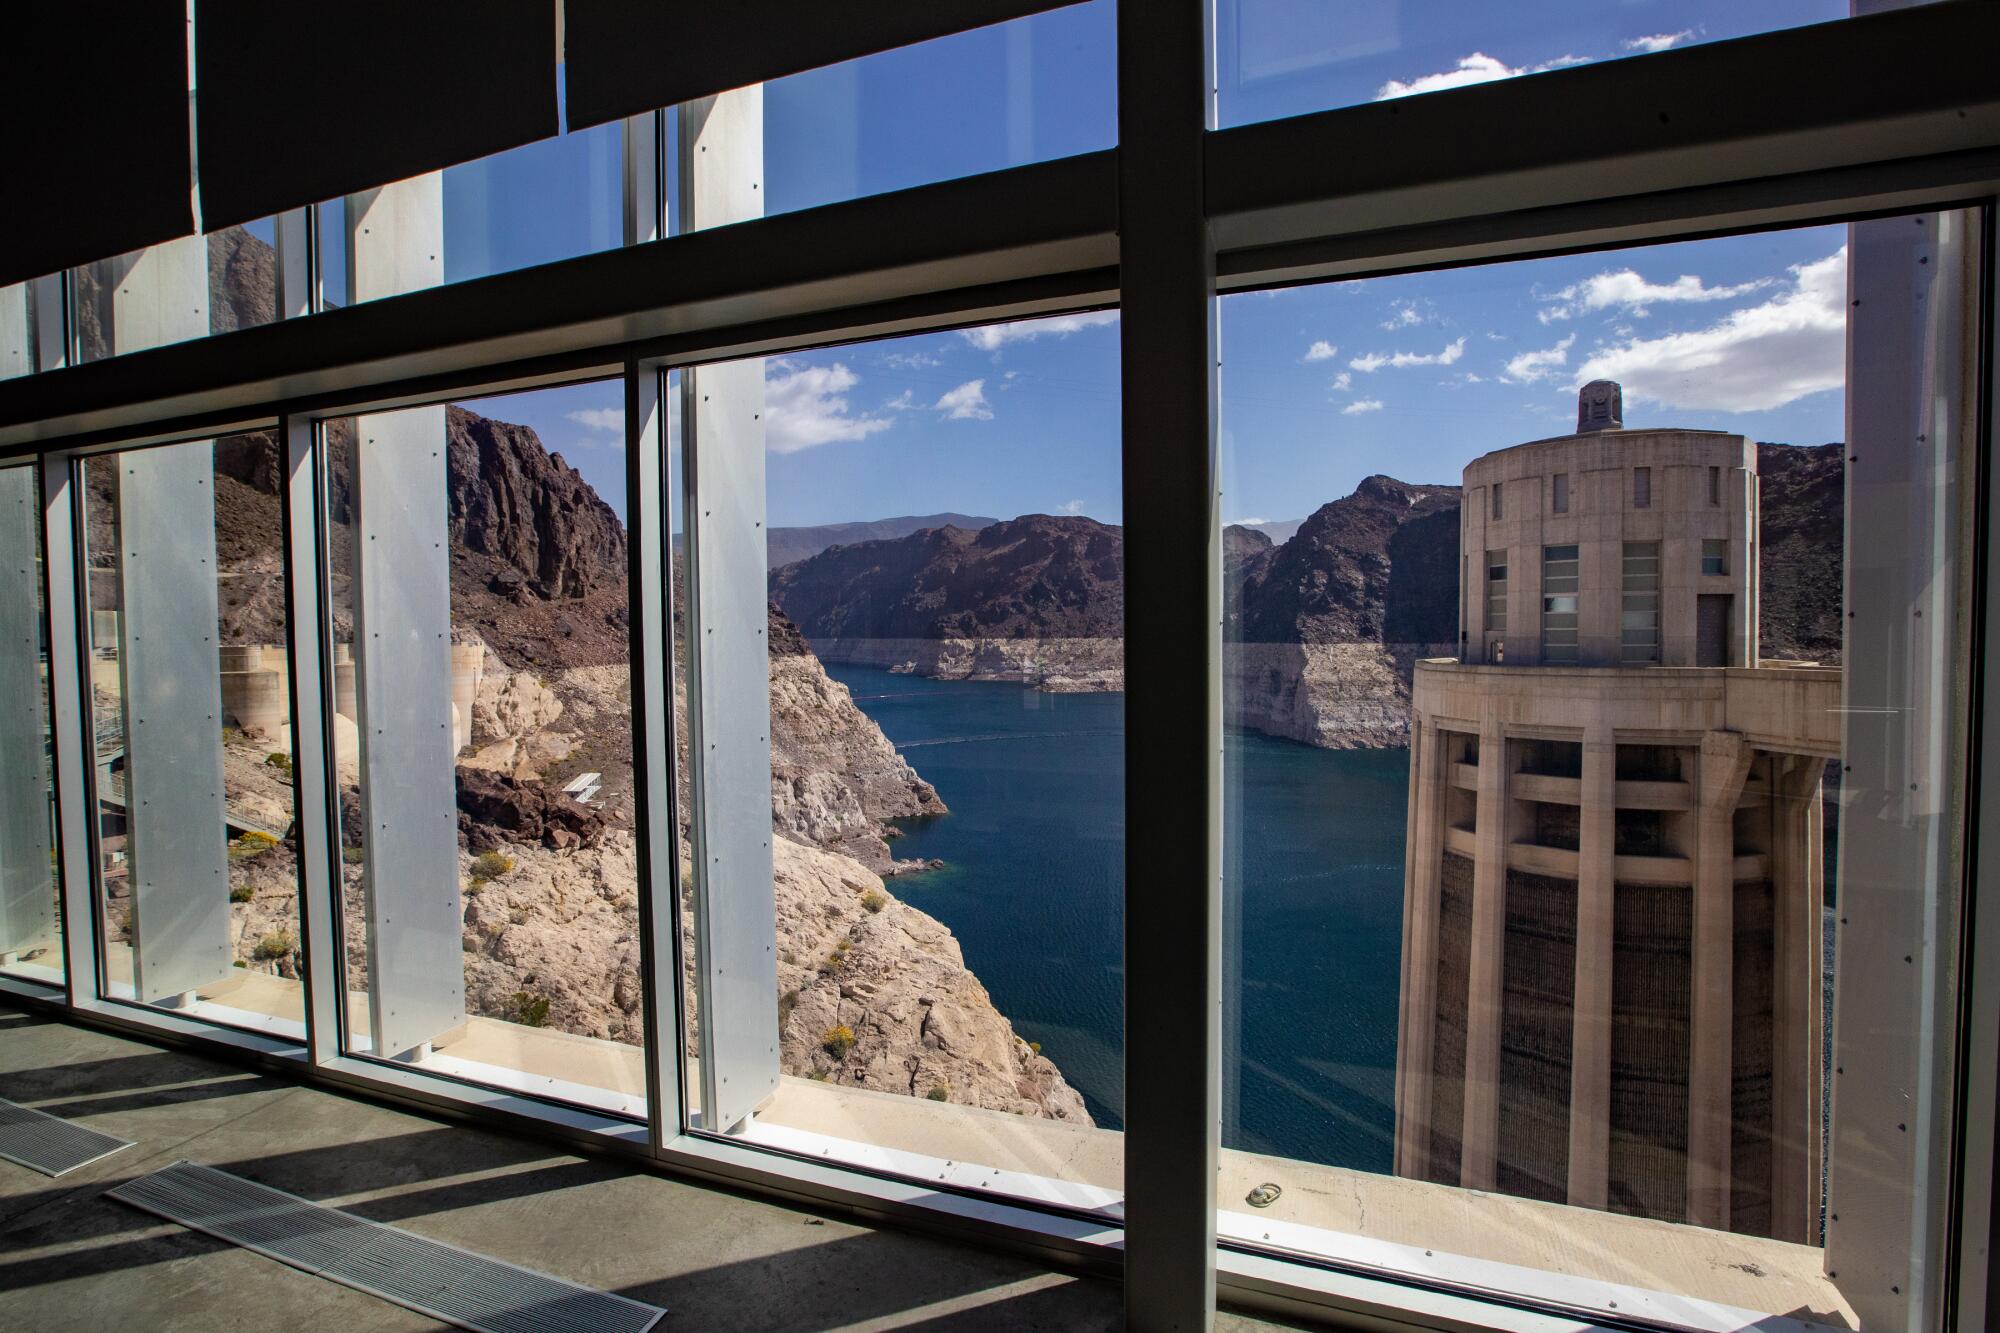  Lake Mead framed through a glass of an observation deck atop the Hoover Dam.